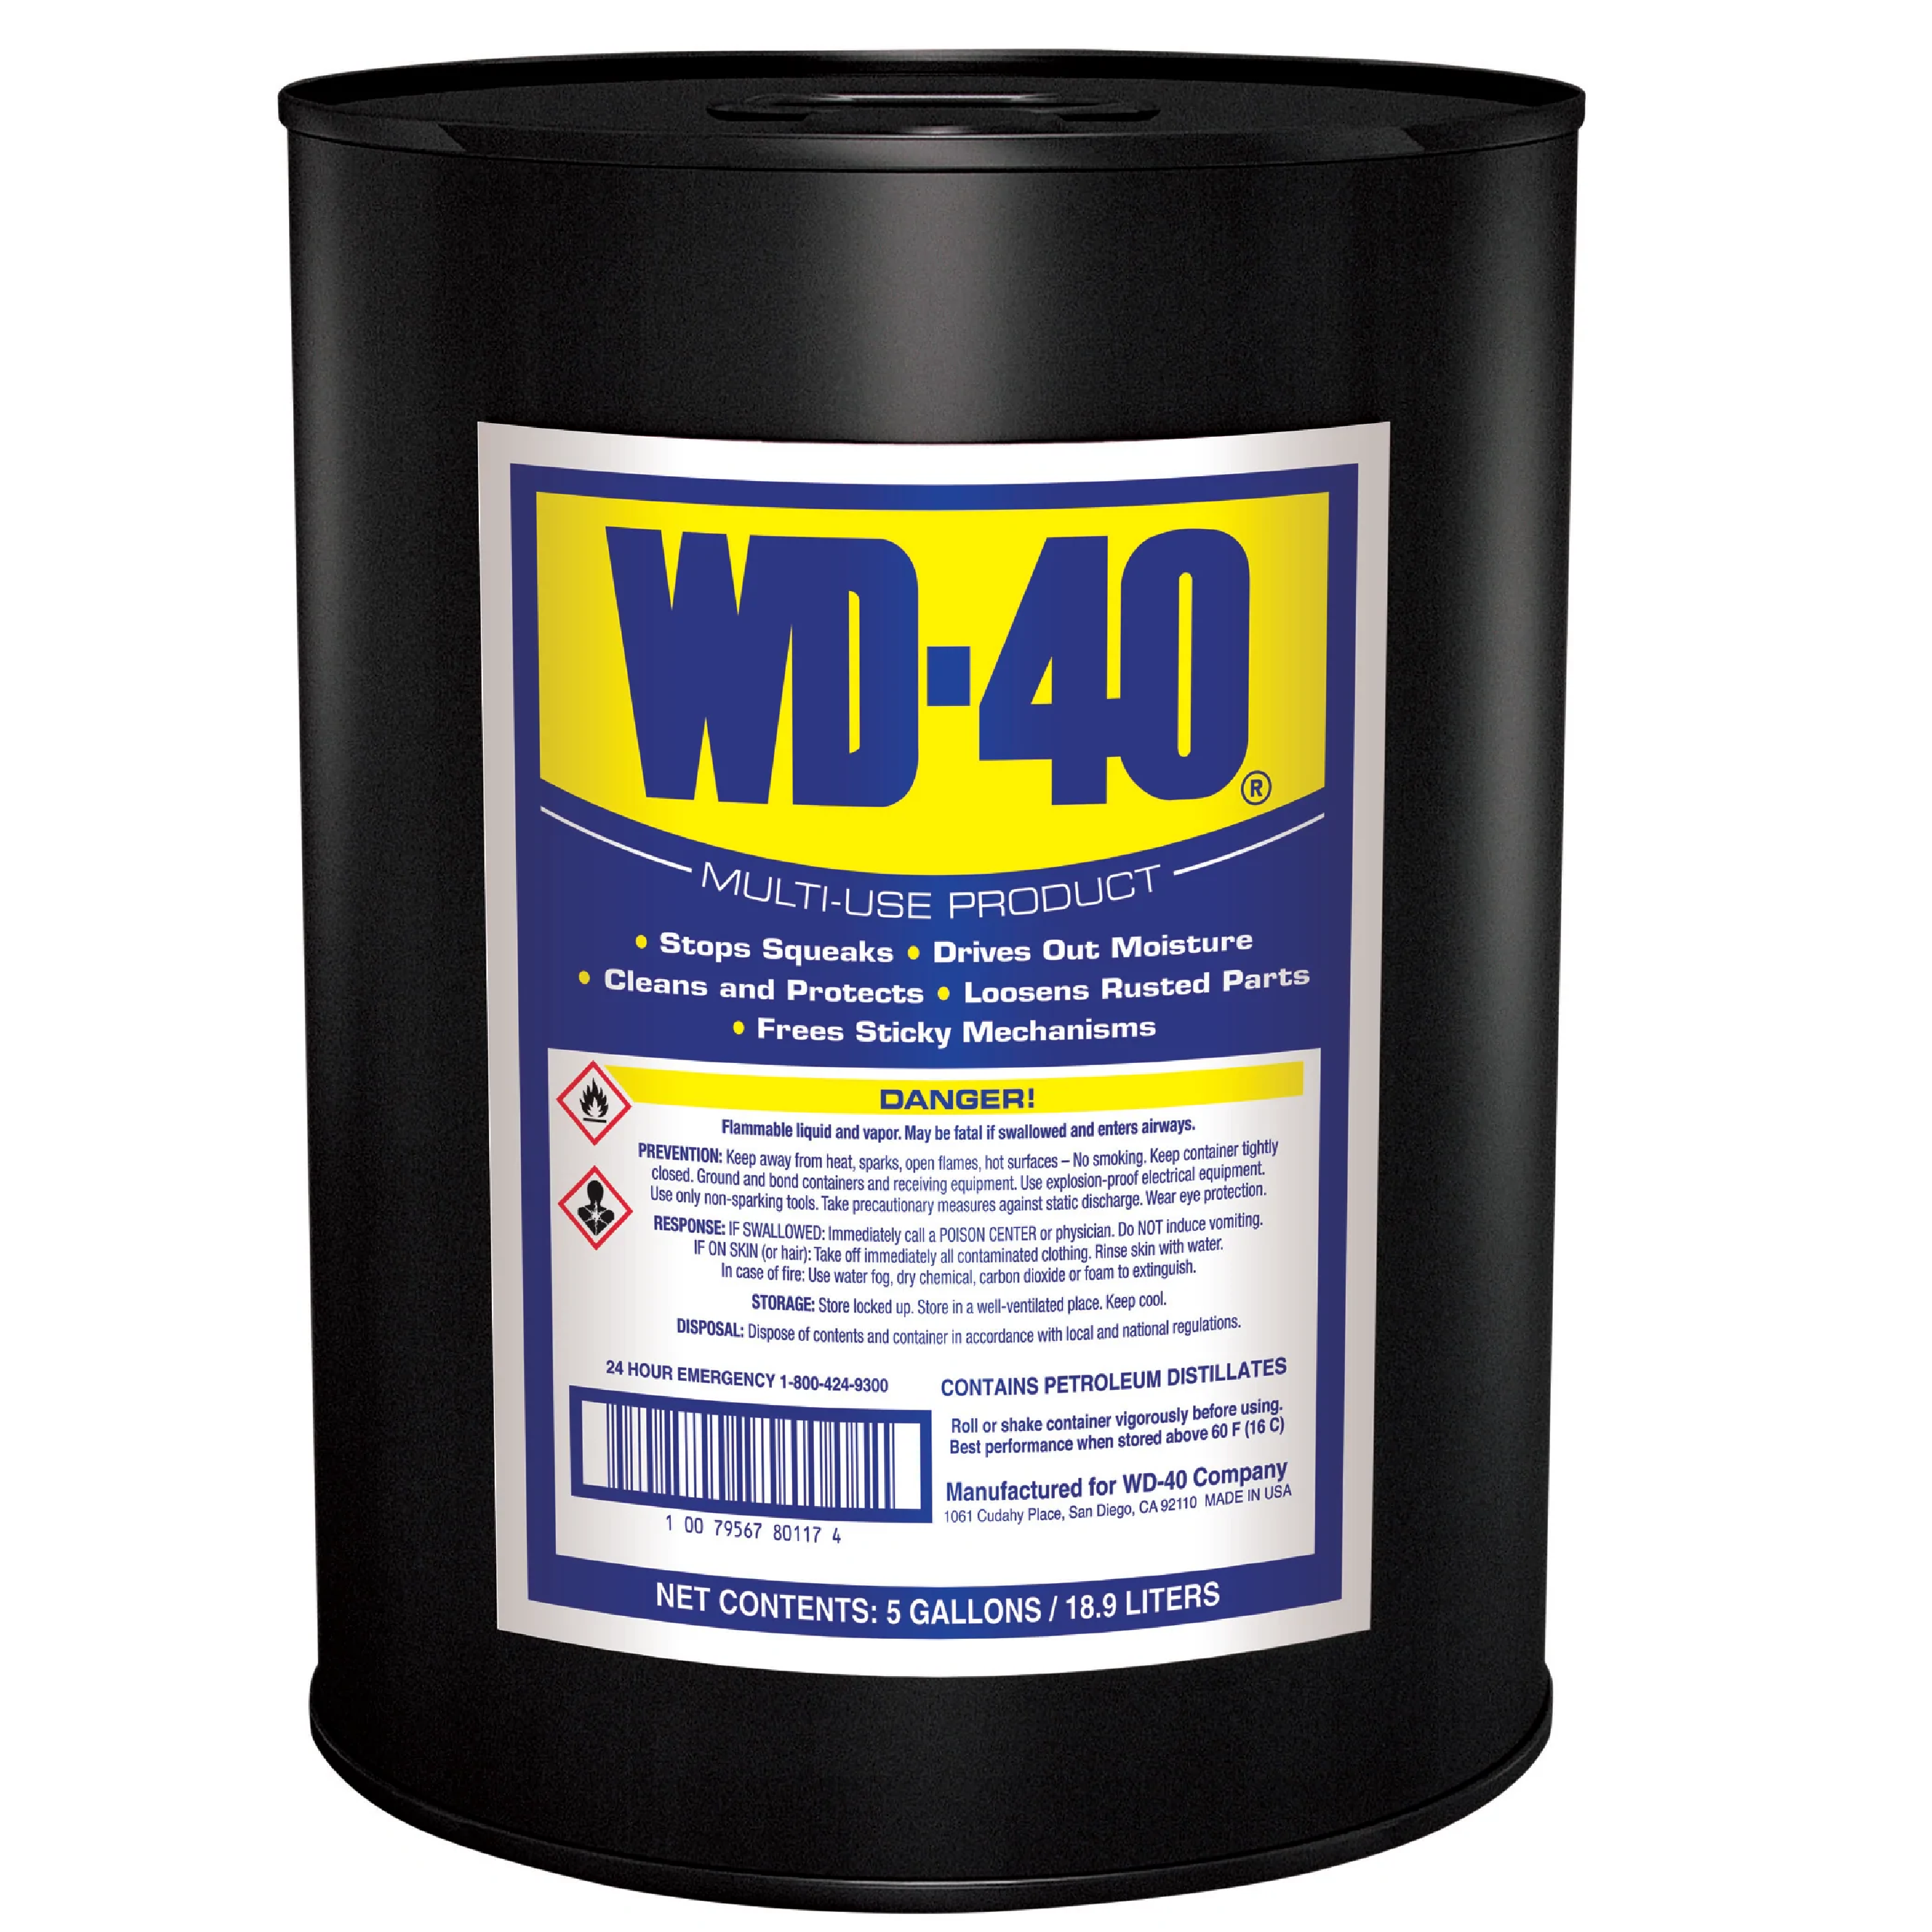 WD40 MULTI USE PRODUCT Lubricant 5 GALLONS